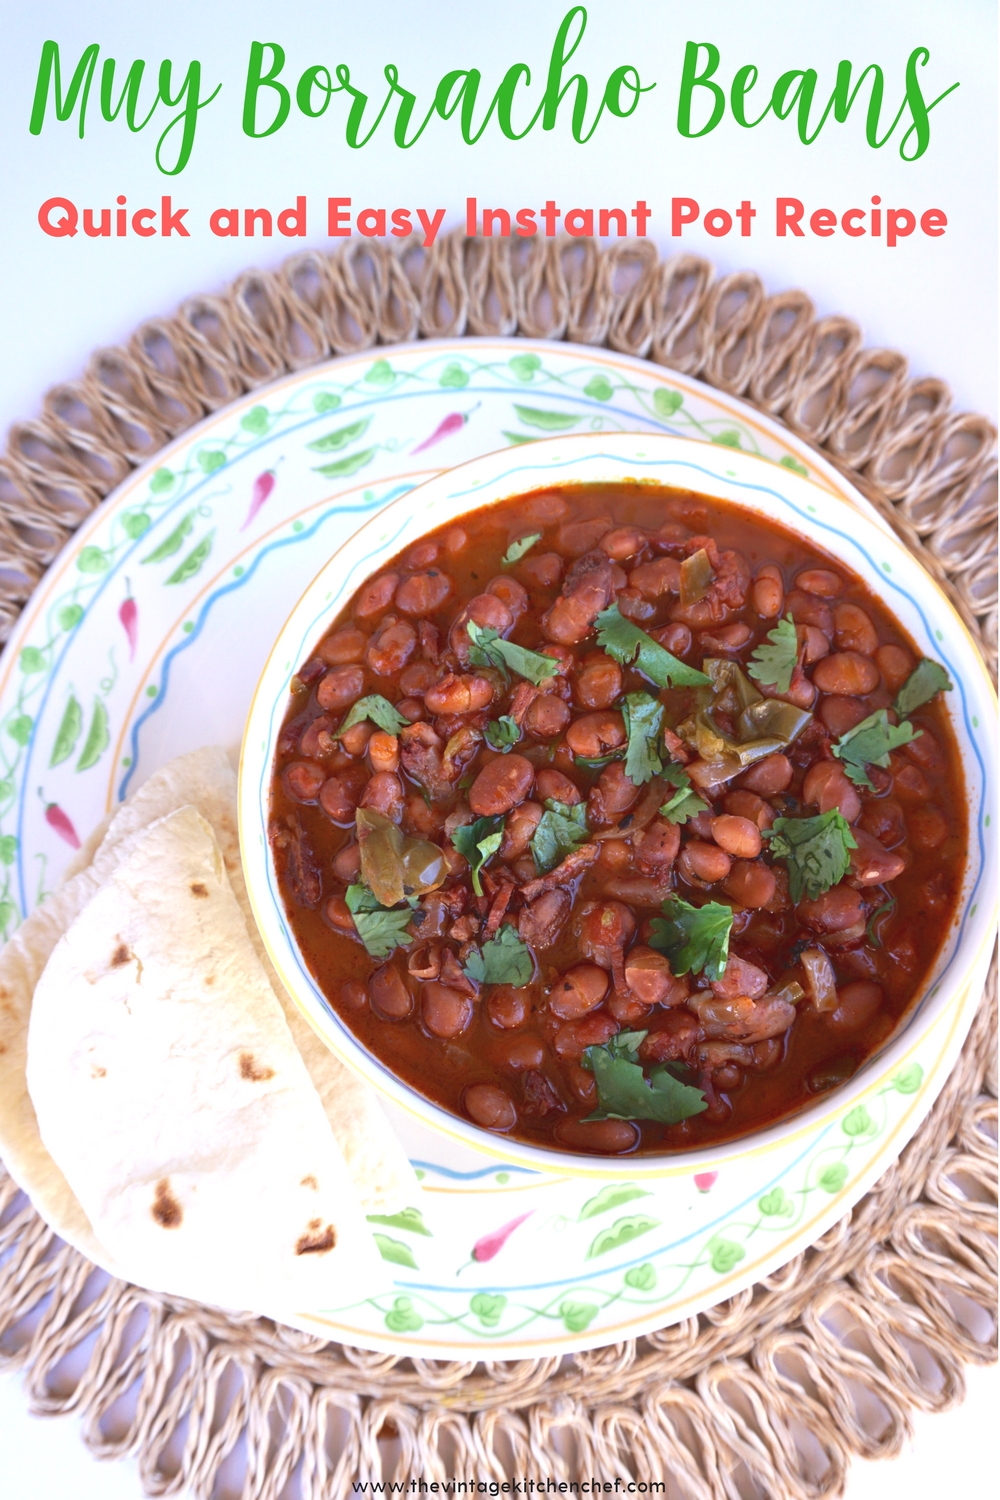 Make these delicious Muy Borracho (very drunk!) beans in your instant pot! They are so flavorful, fast and easy. Sure to be a favorite!